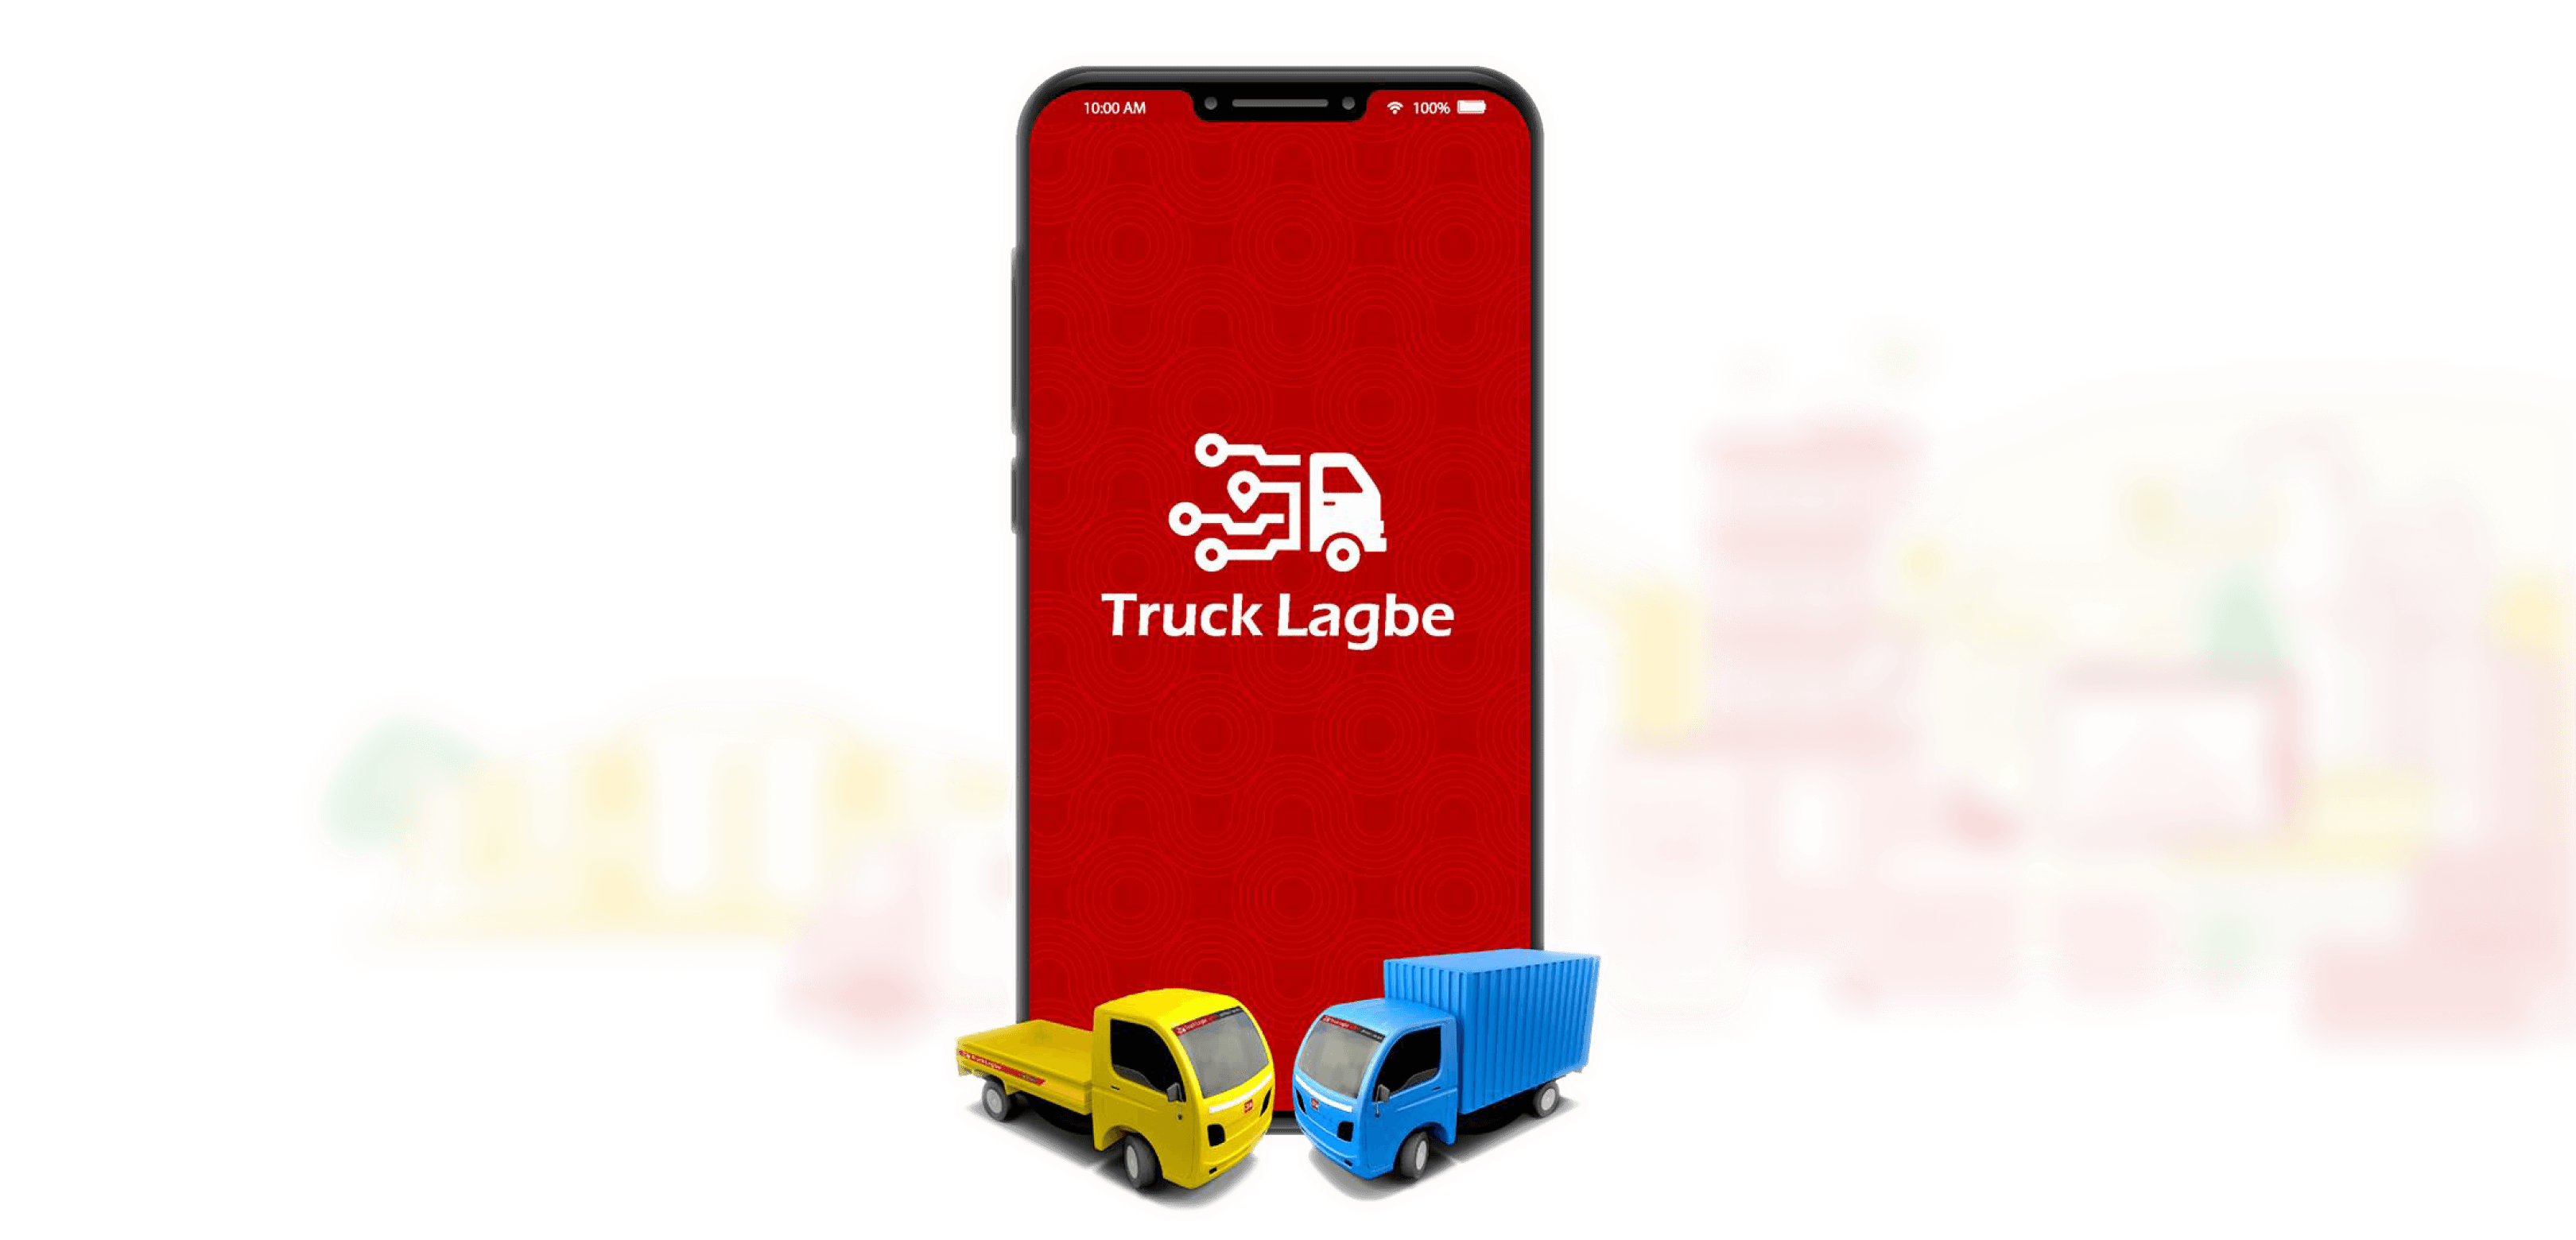 Truck Lagbe App: KYS (Know Your Suppliers) ID Verification Programme Case Study by Anamoul Rouf, Product Designer